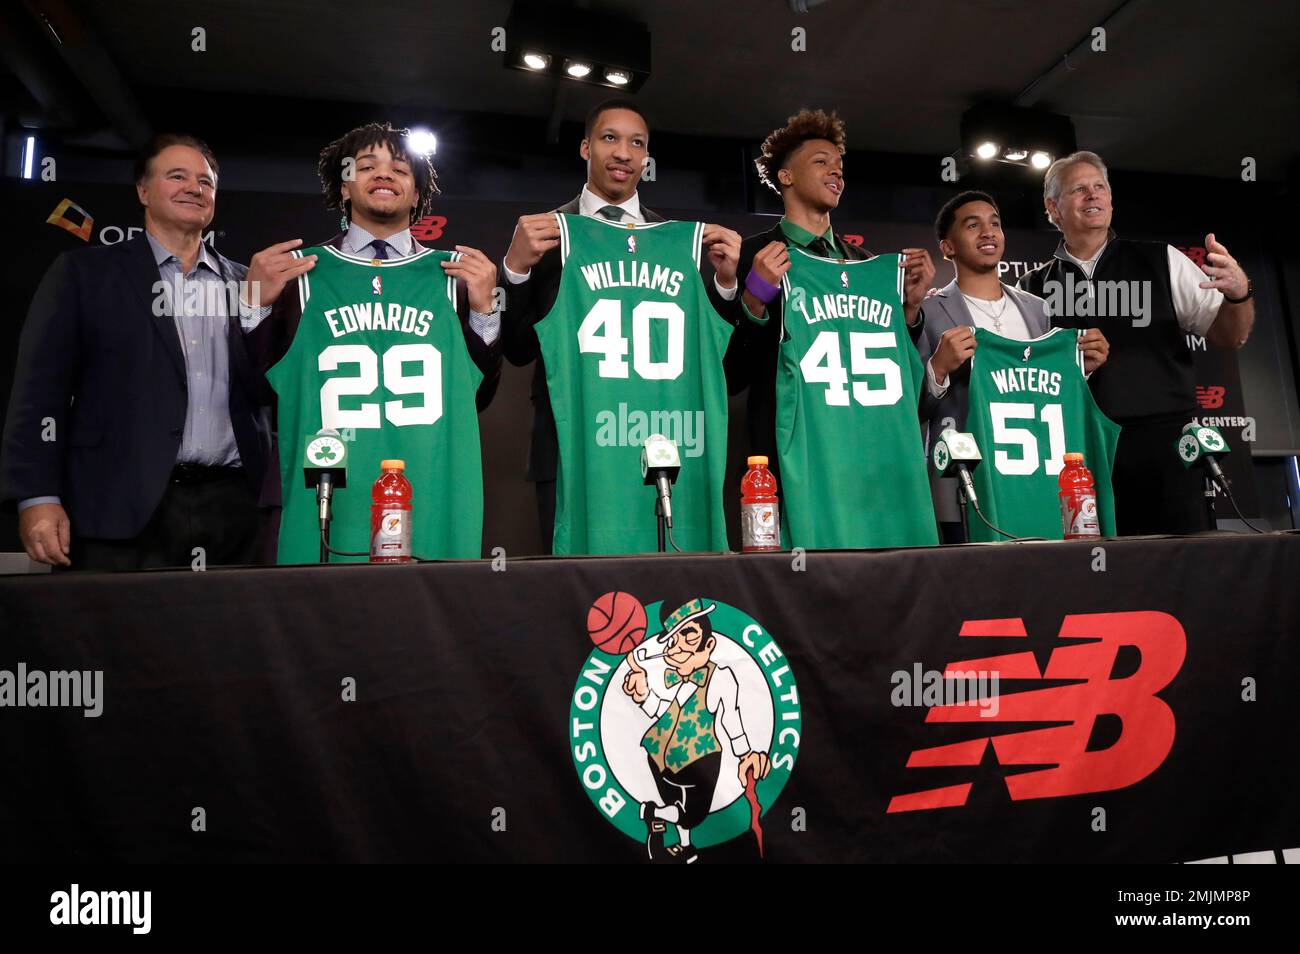 Boston Celtics 2019 basketball draft players show off their jerseys at a  news conference, Monday, June 24, 2019, in Boston. Players from left are  Carsen Edwards, Grant Williams, Romeo Langford and Tremont